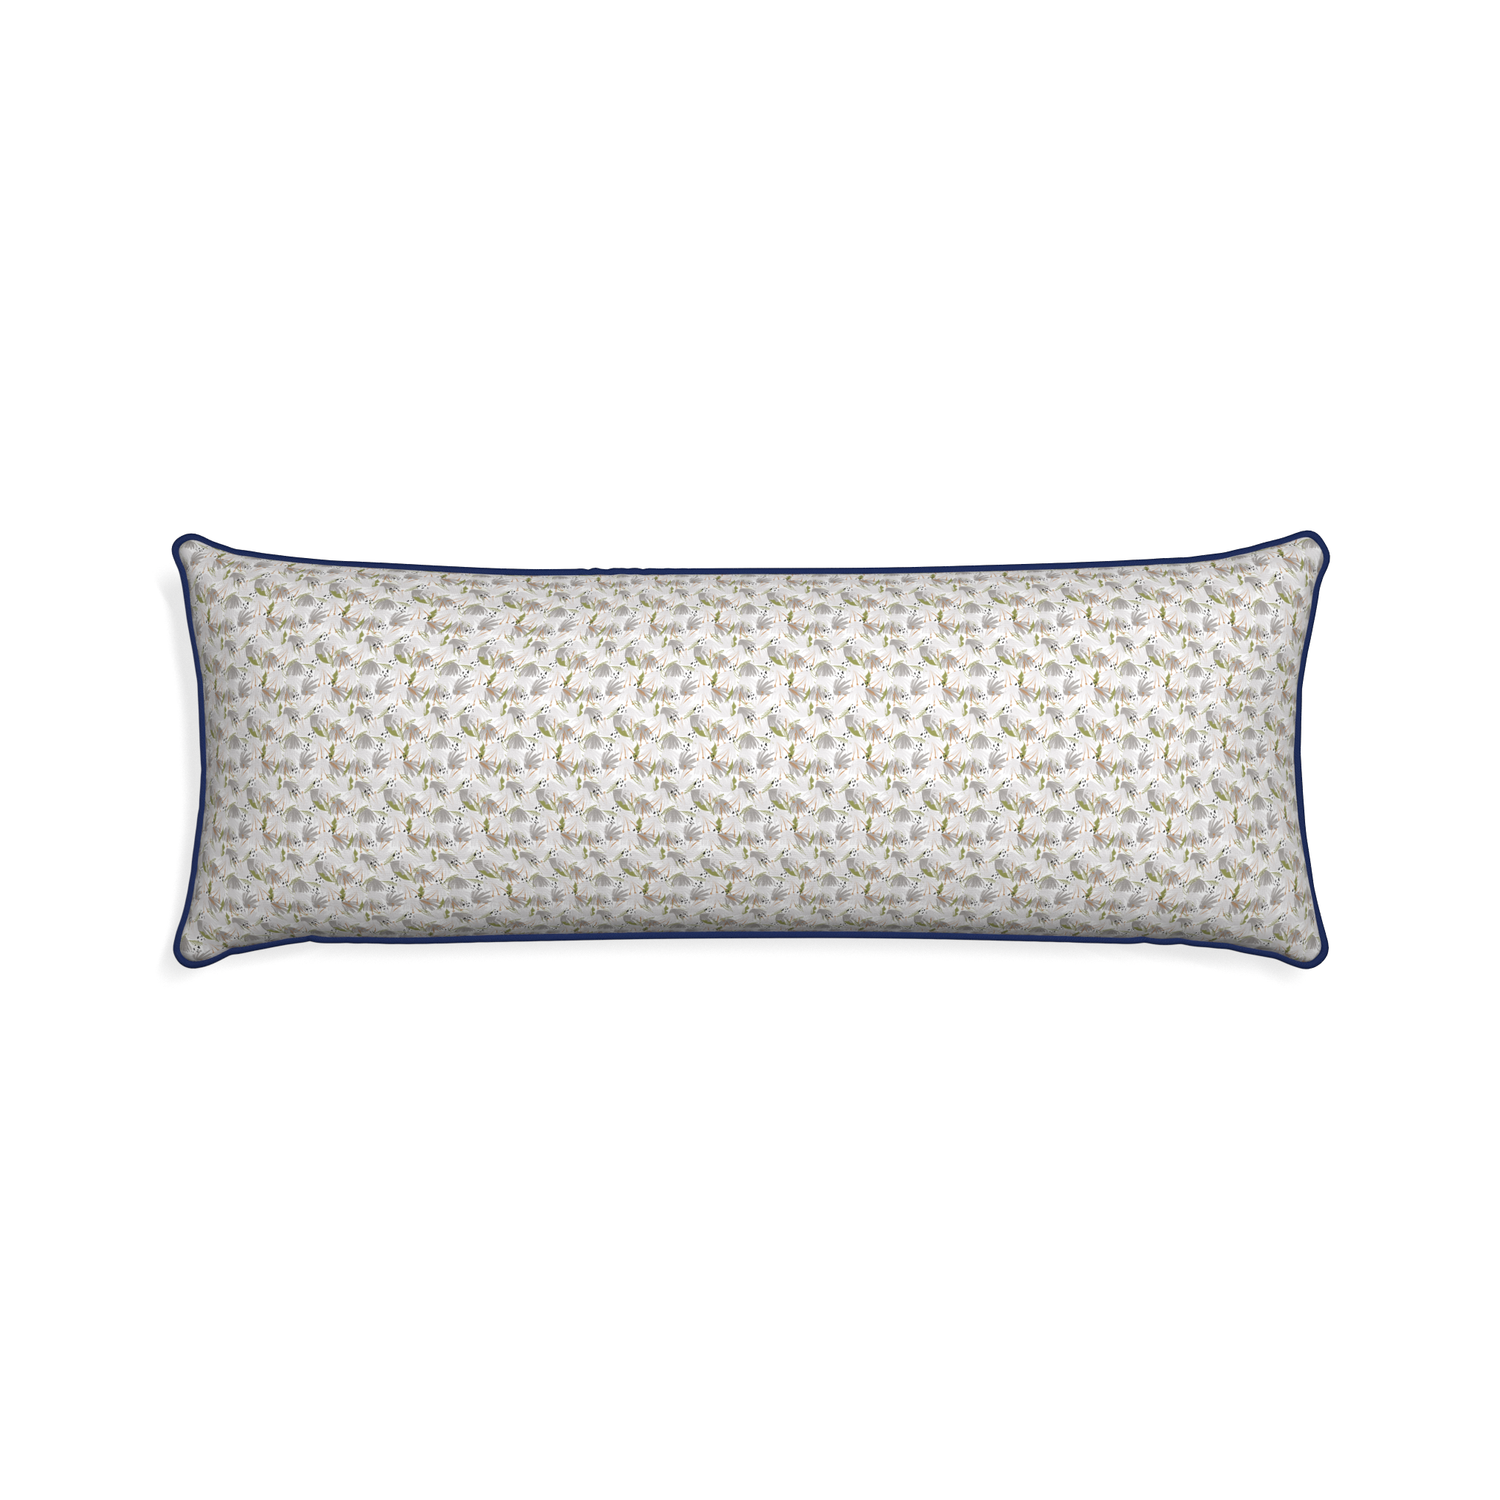 Xl-lumbar eden grey custom grey floralpillow with midnight piping on white background